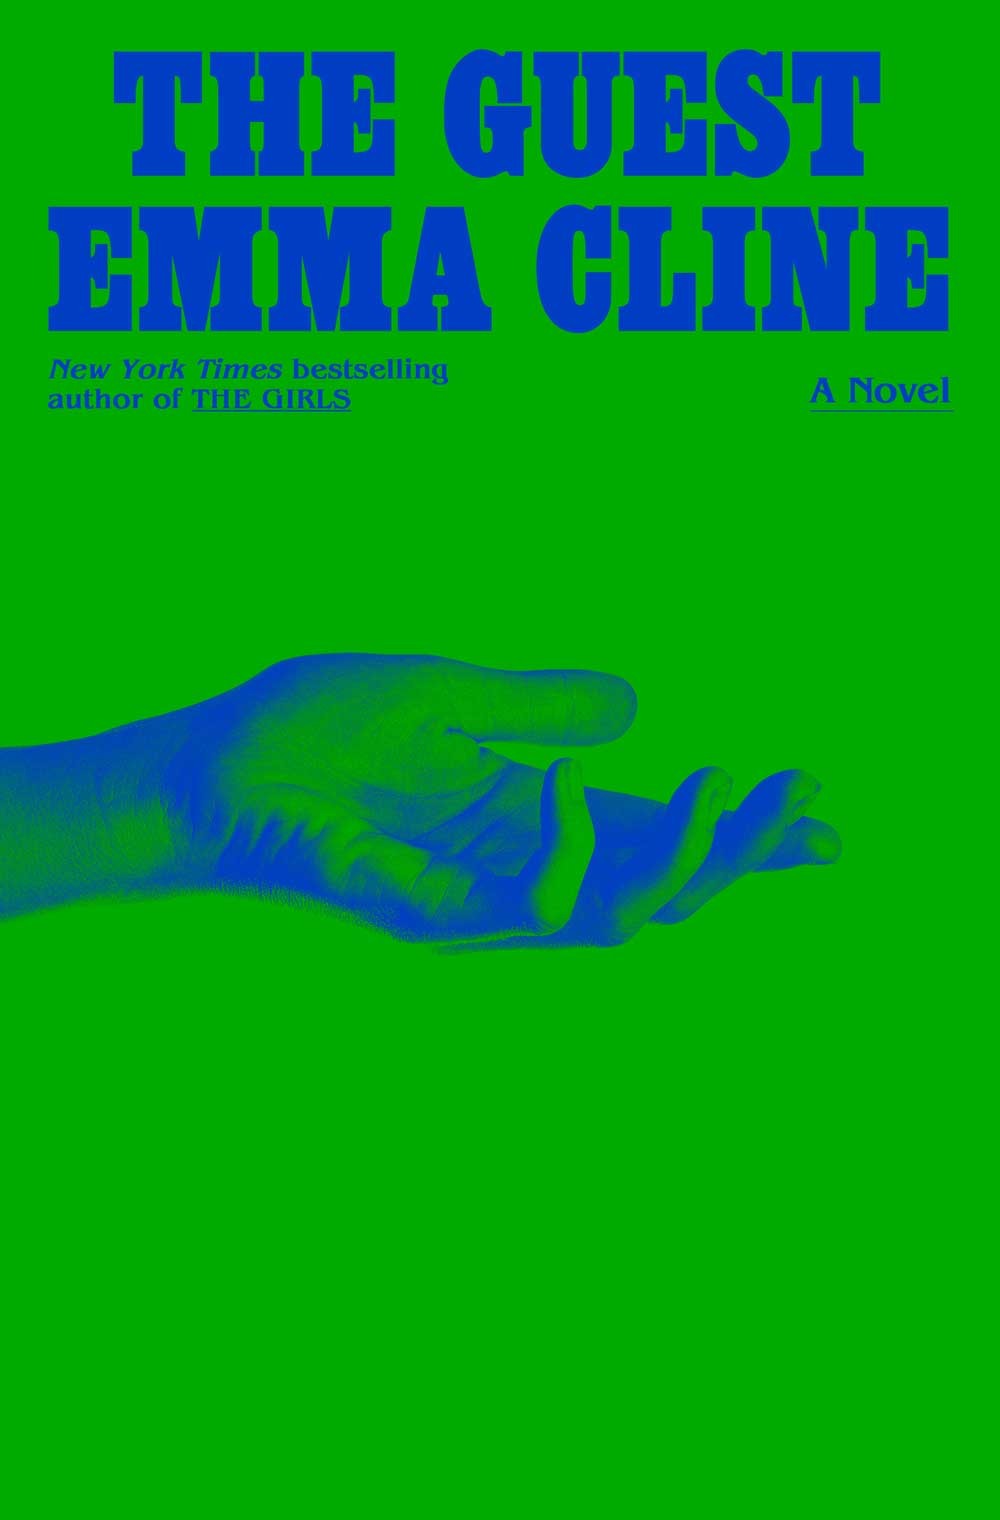 Book cover of The Guest with an image of a hand reaching on a green background.